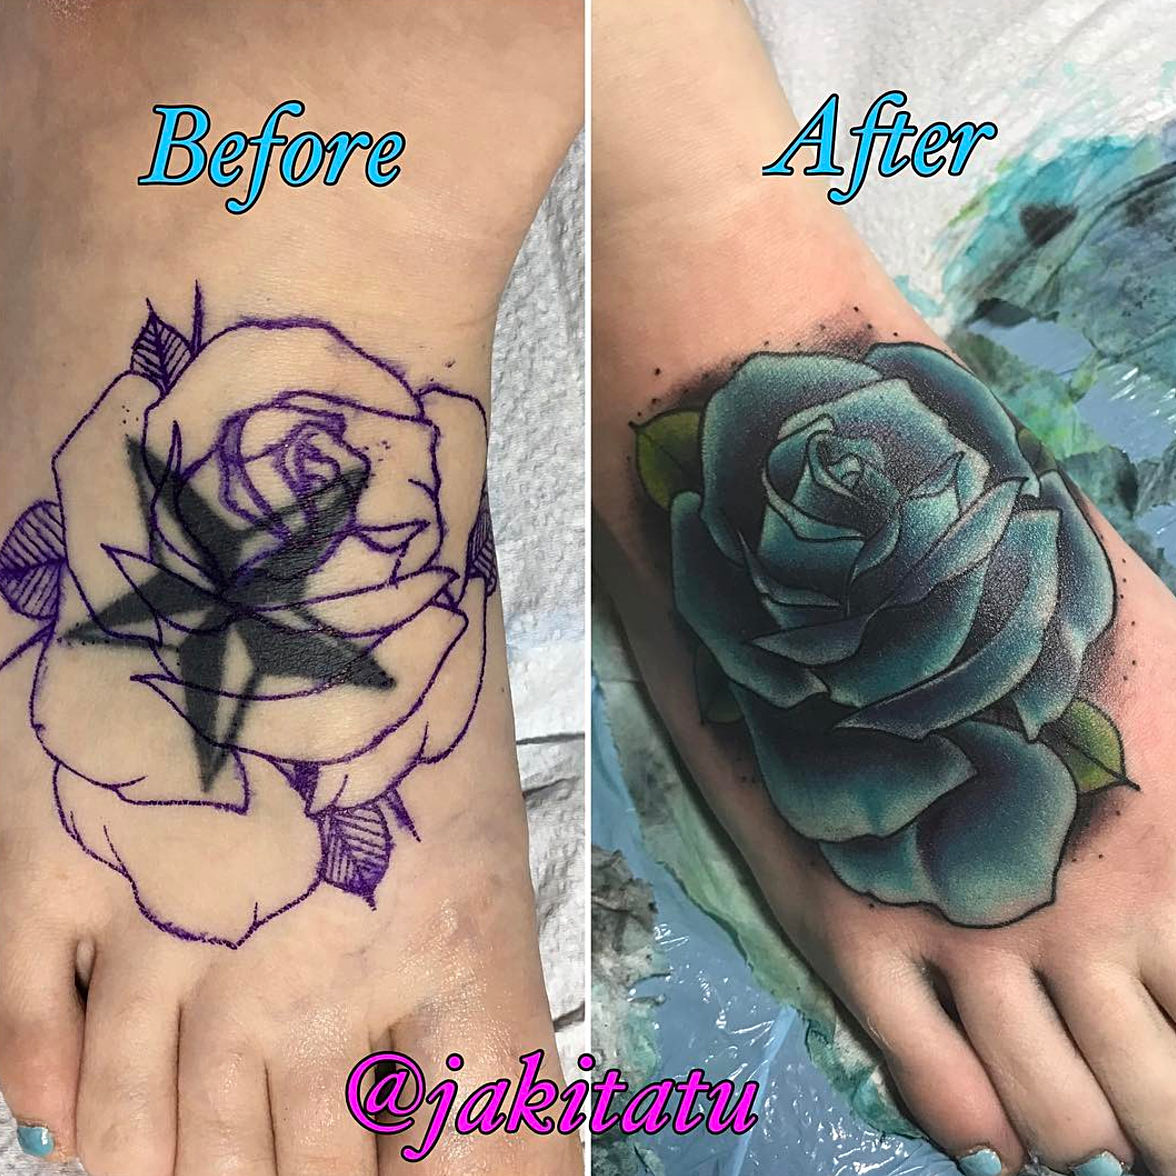 Cover up of an old crown tattoo with a rose inside a triangle tattoo